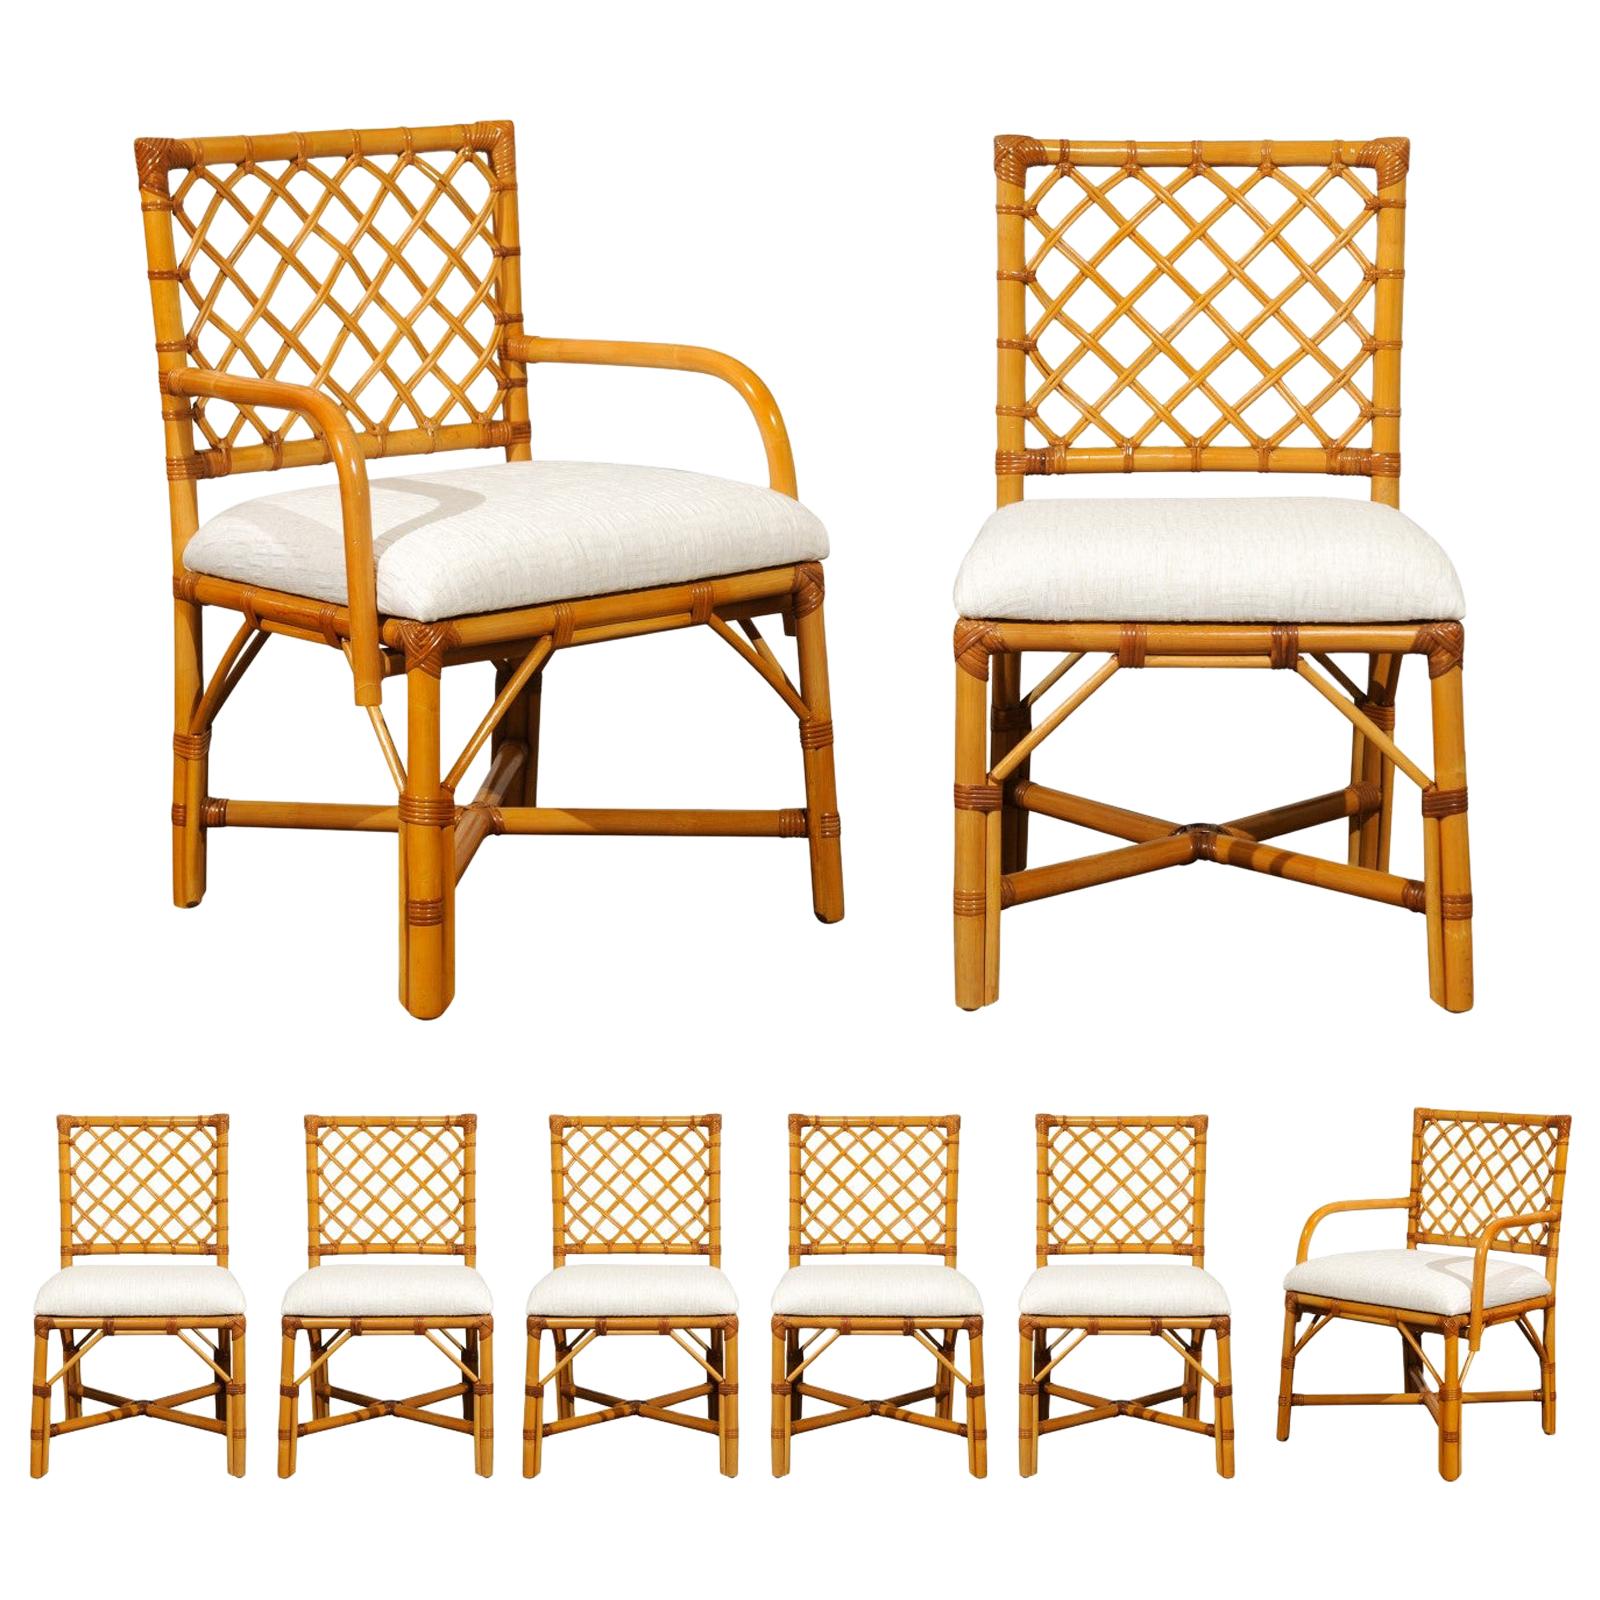 Fabulous Set of 8 Rattan and Cane Dining Chairs by Bielecky Brothers, circa 1975